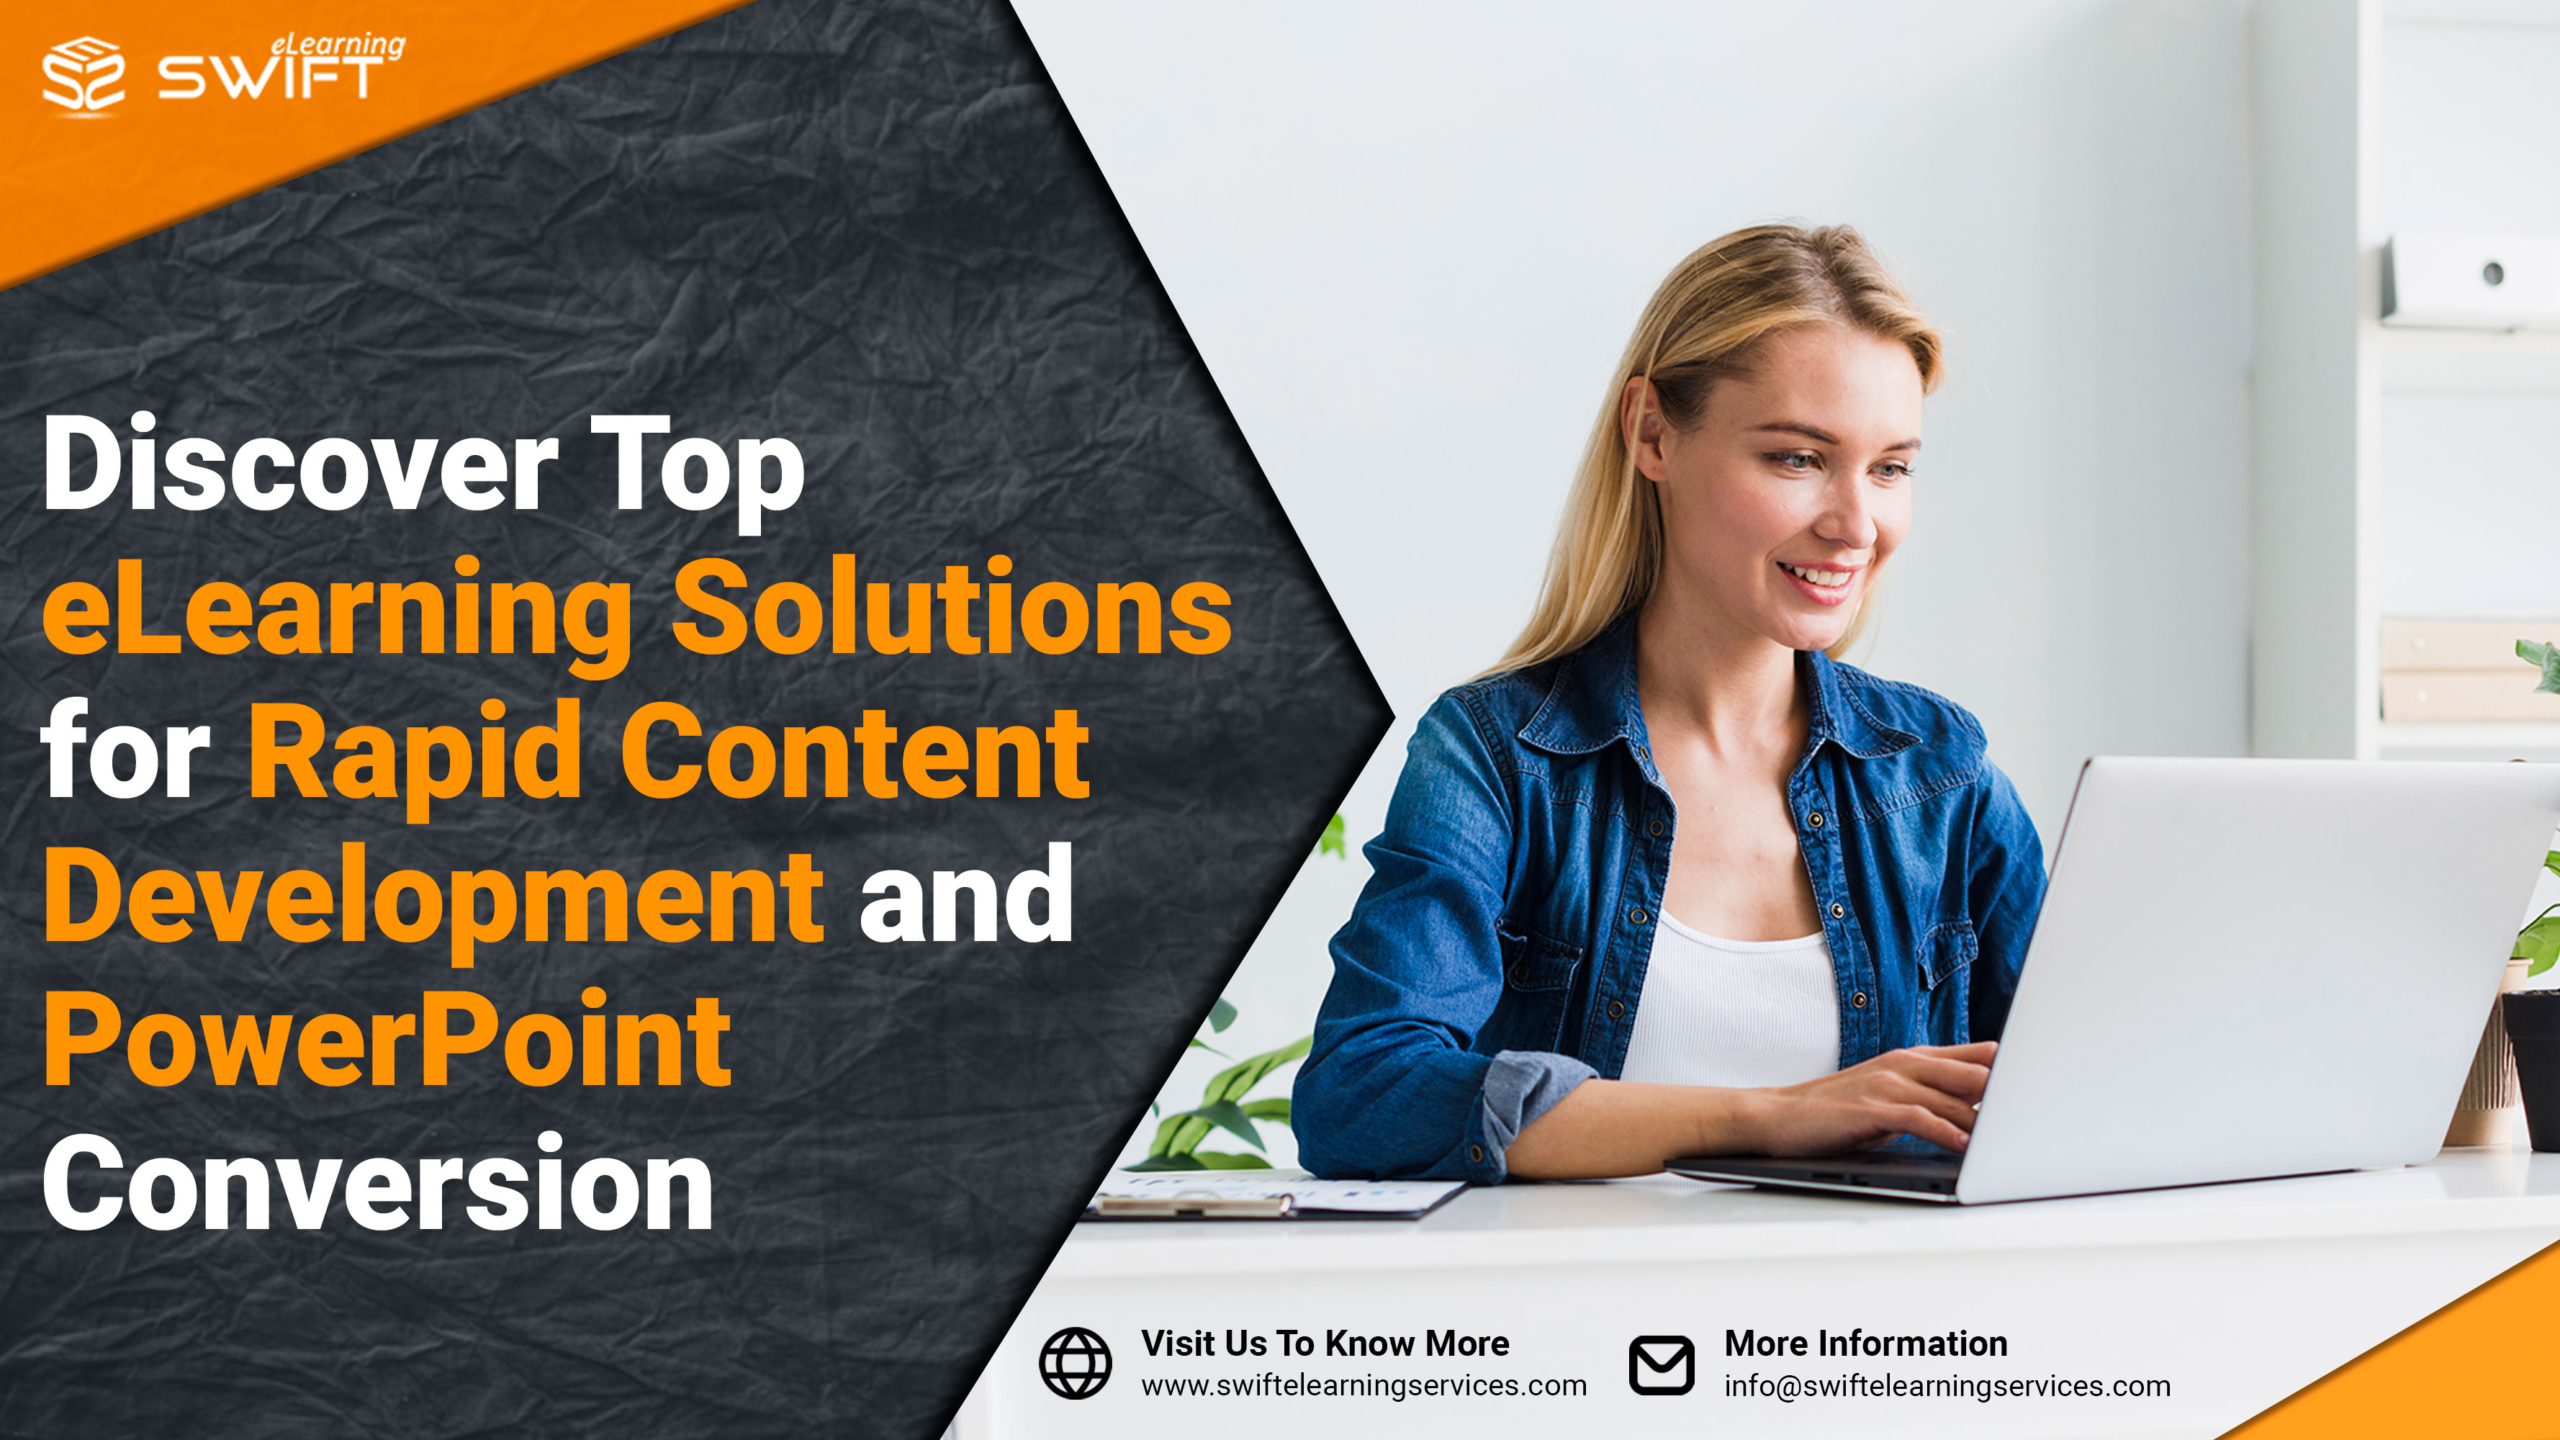 eLearning Solutions Rapid Content Development and PowerPoint Conversion